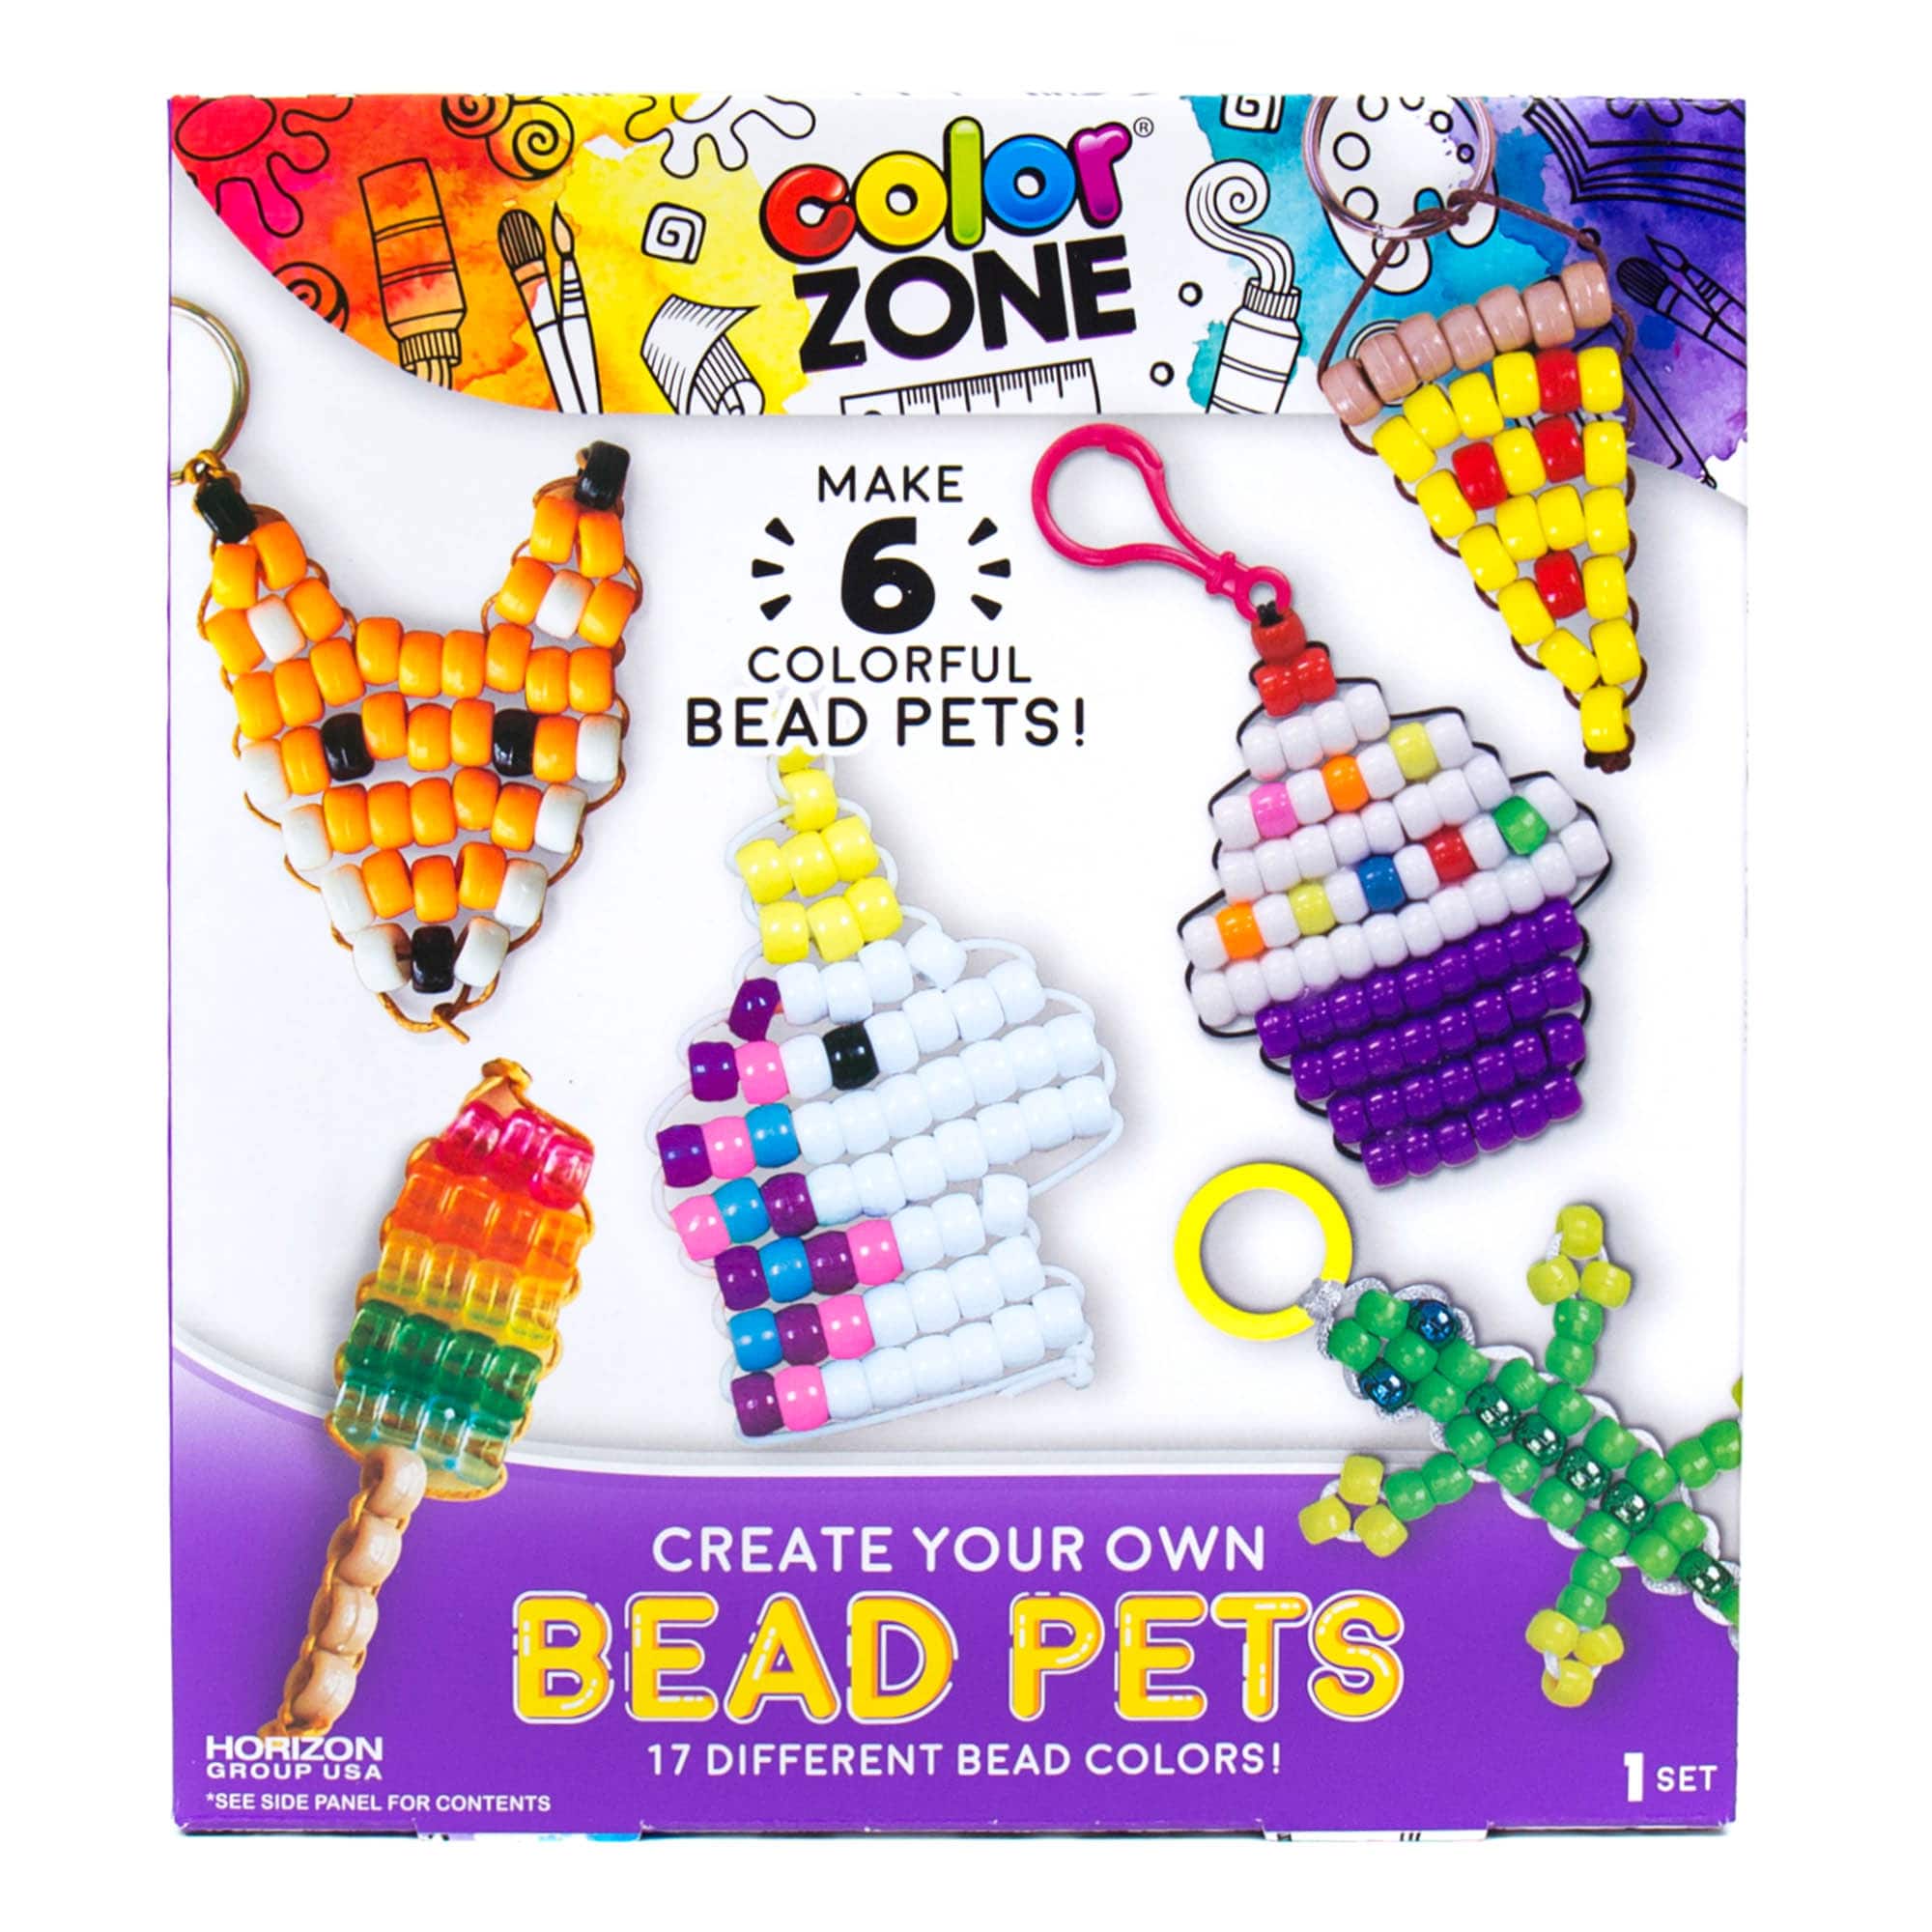 Storage Box & Much More 2020 Version 6 Key Rings Includes Over 600 Pony Beads Made By Me Create Your Own Bead Pets by Horizon Group USA 